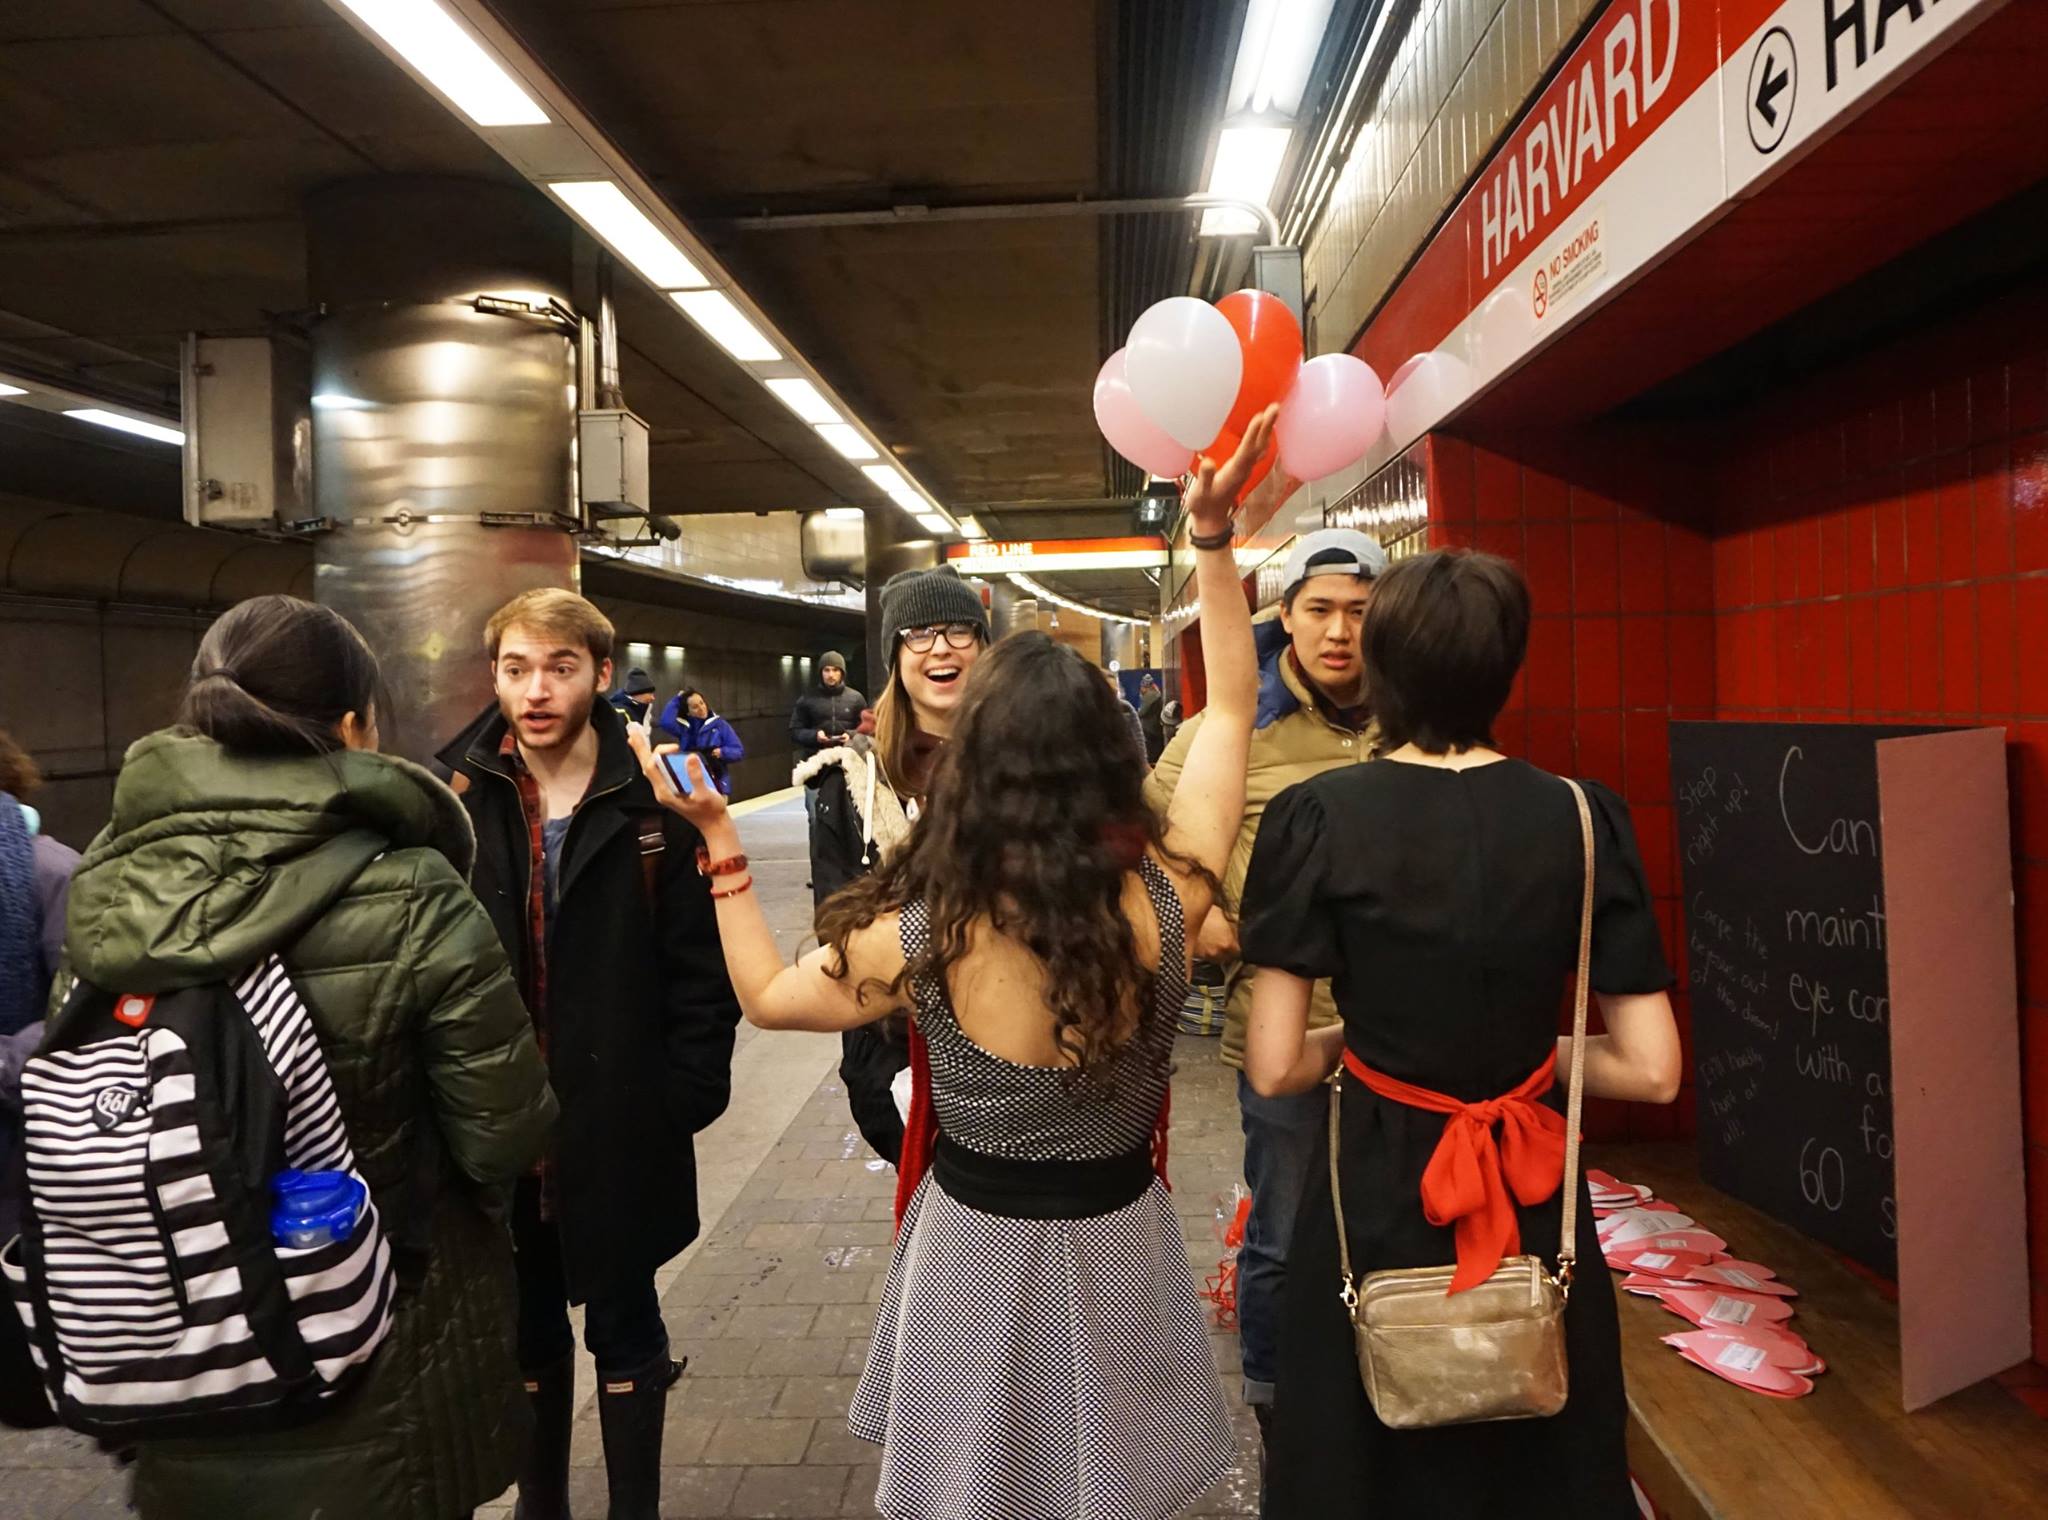  Woman holding balloons in subway station  